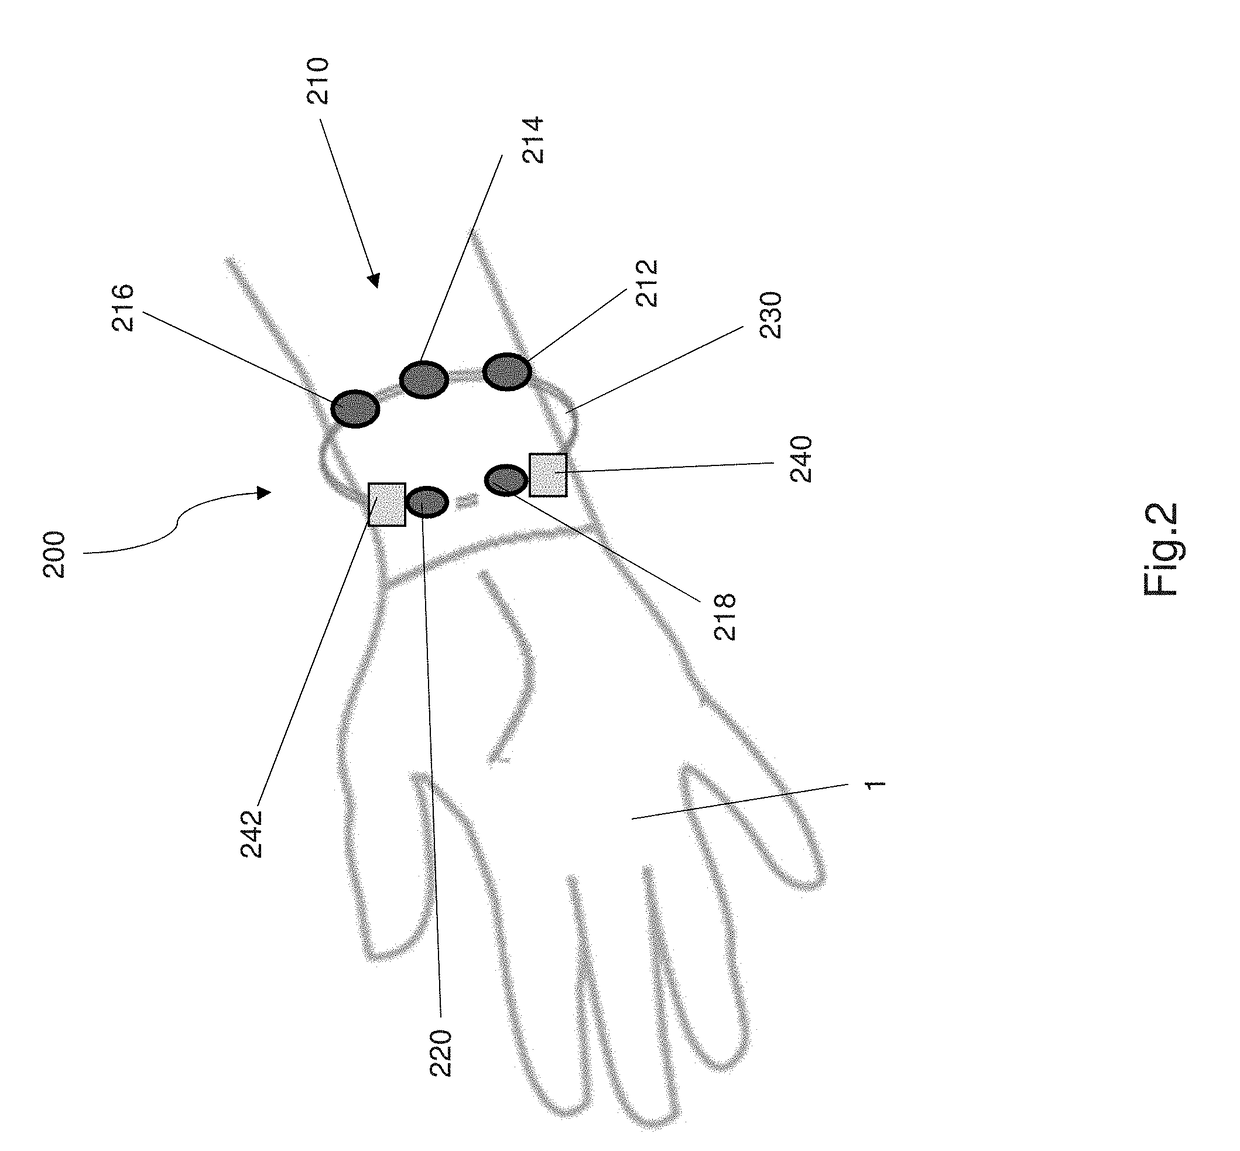 Gesture recognition apparatus and components thereof